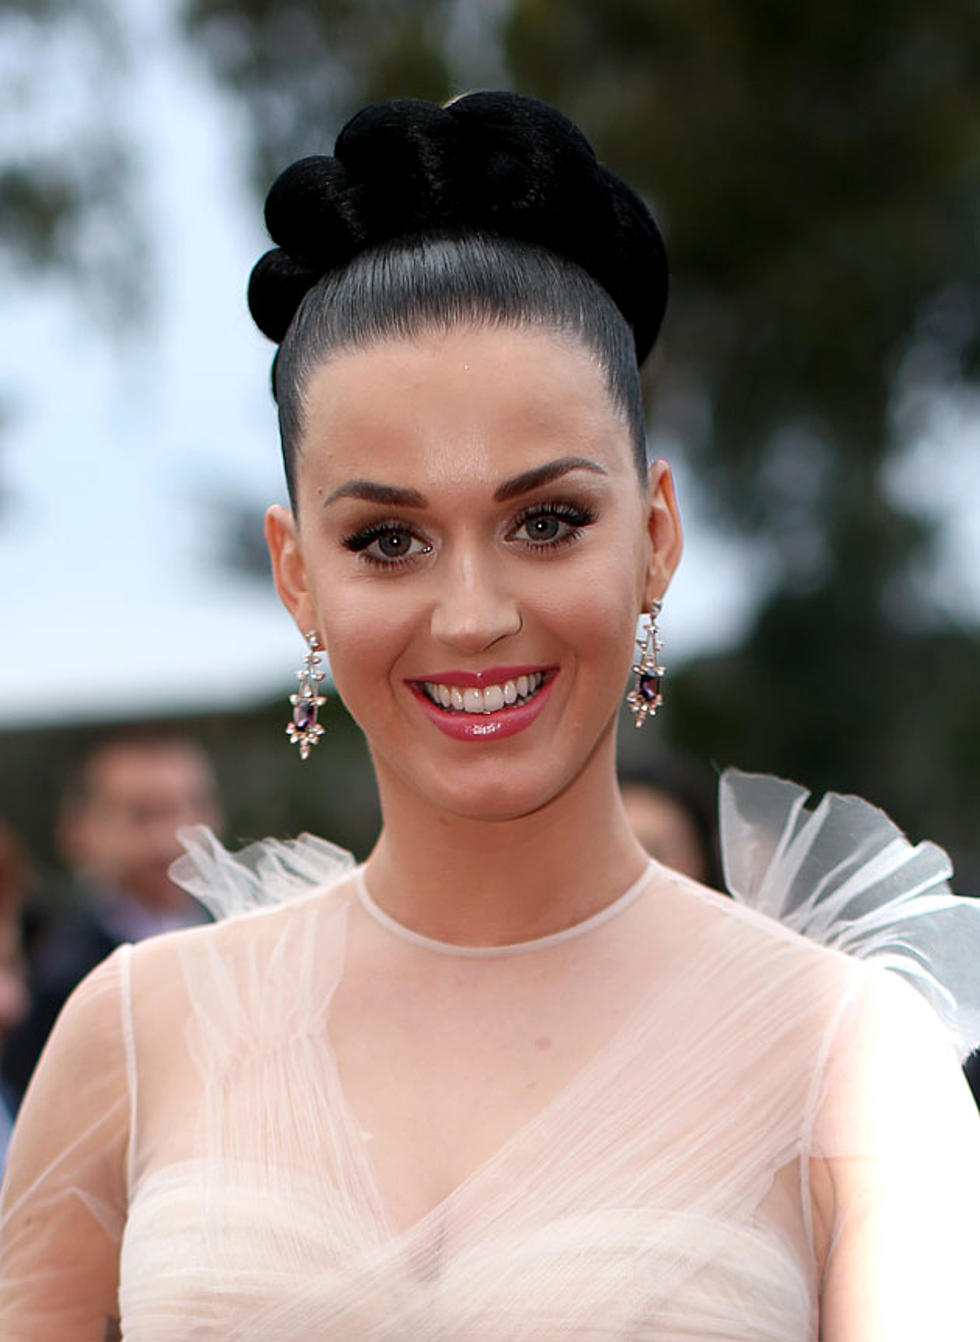 Katy Perry Has Been Chosen To Perform At Super Bowl 49’s Halftime Show